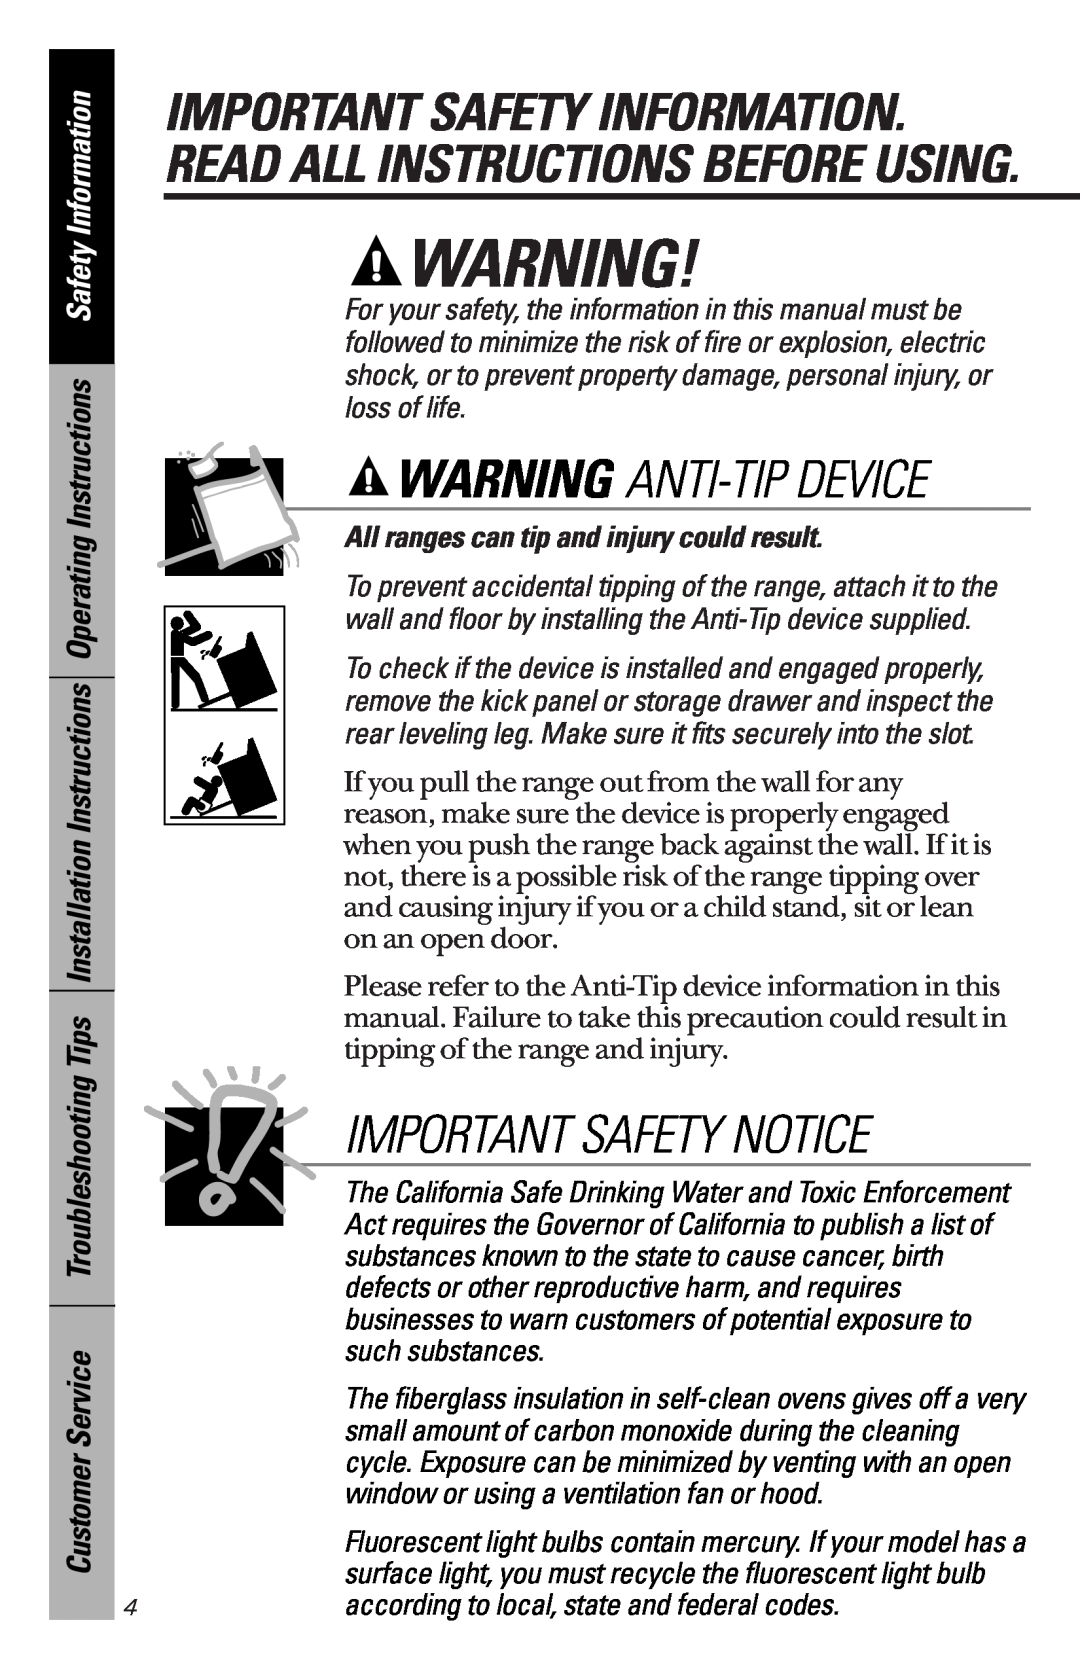 GE 164D3333P172 owner manual Warning Anti-Tipdevice, Important Safety Notice, All ranges can tip and injury could result 